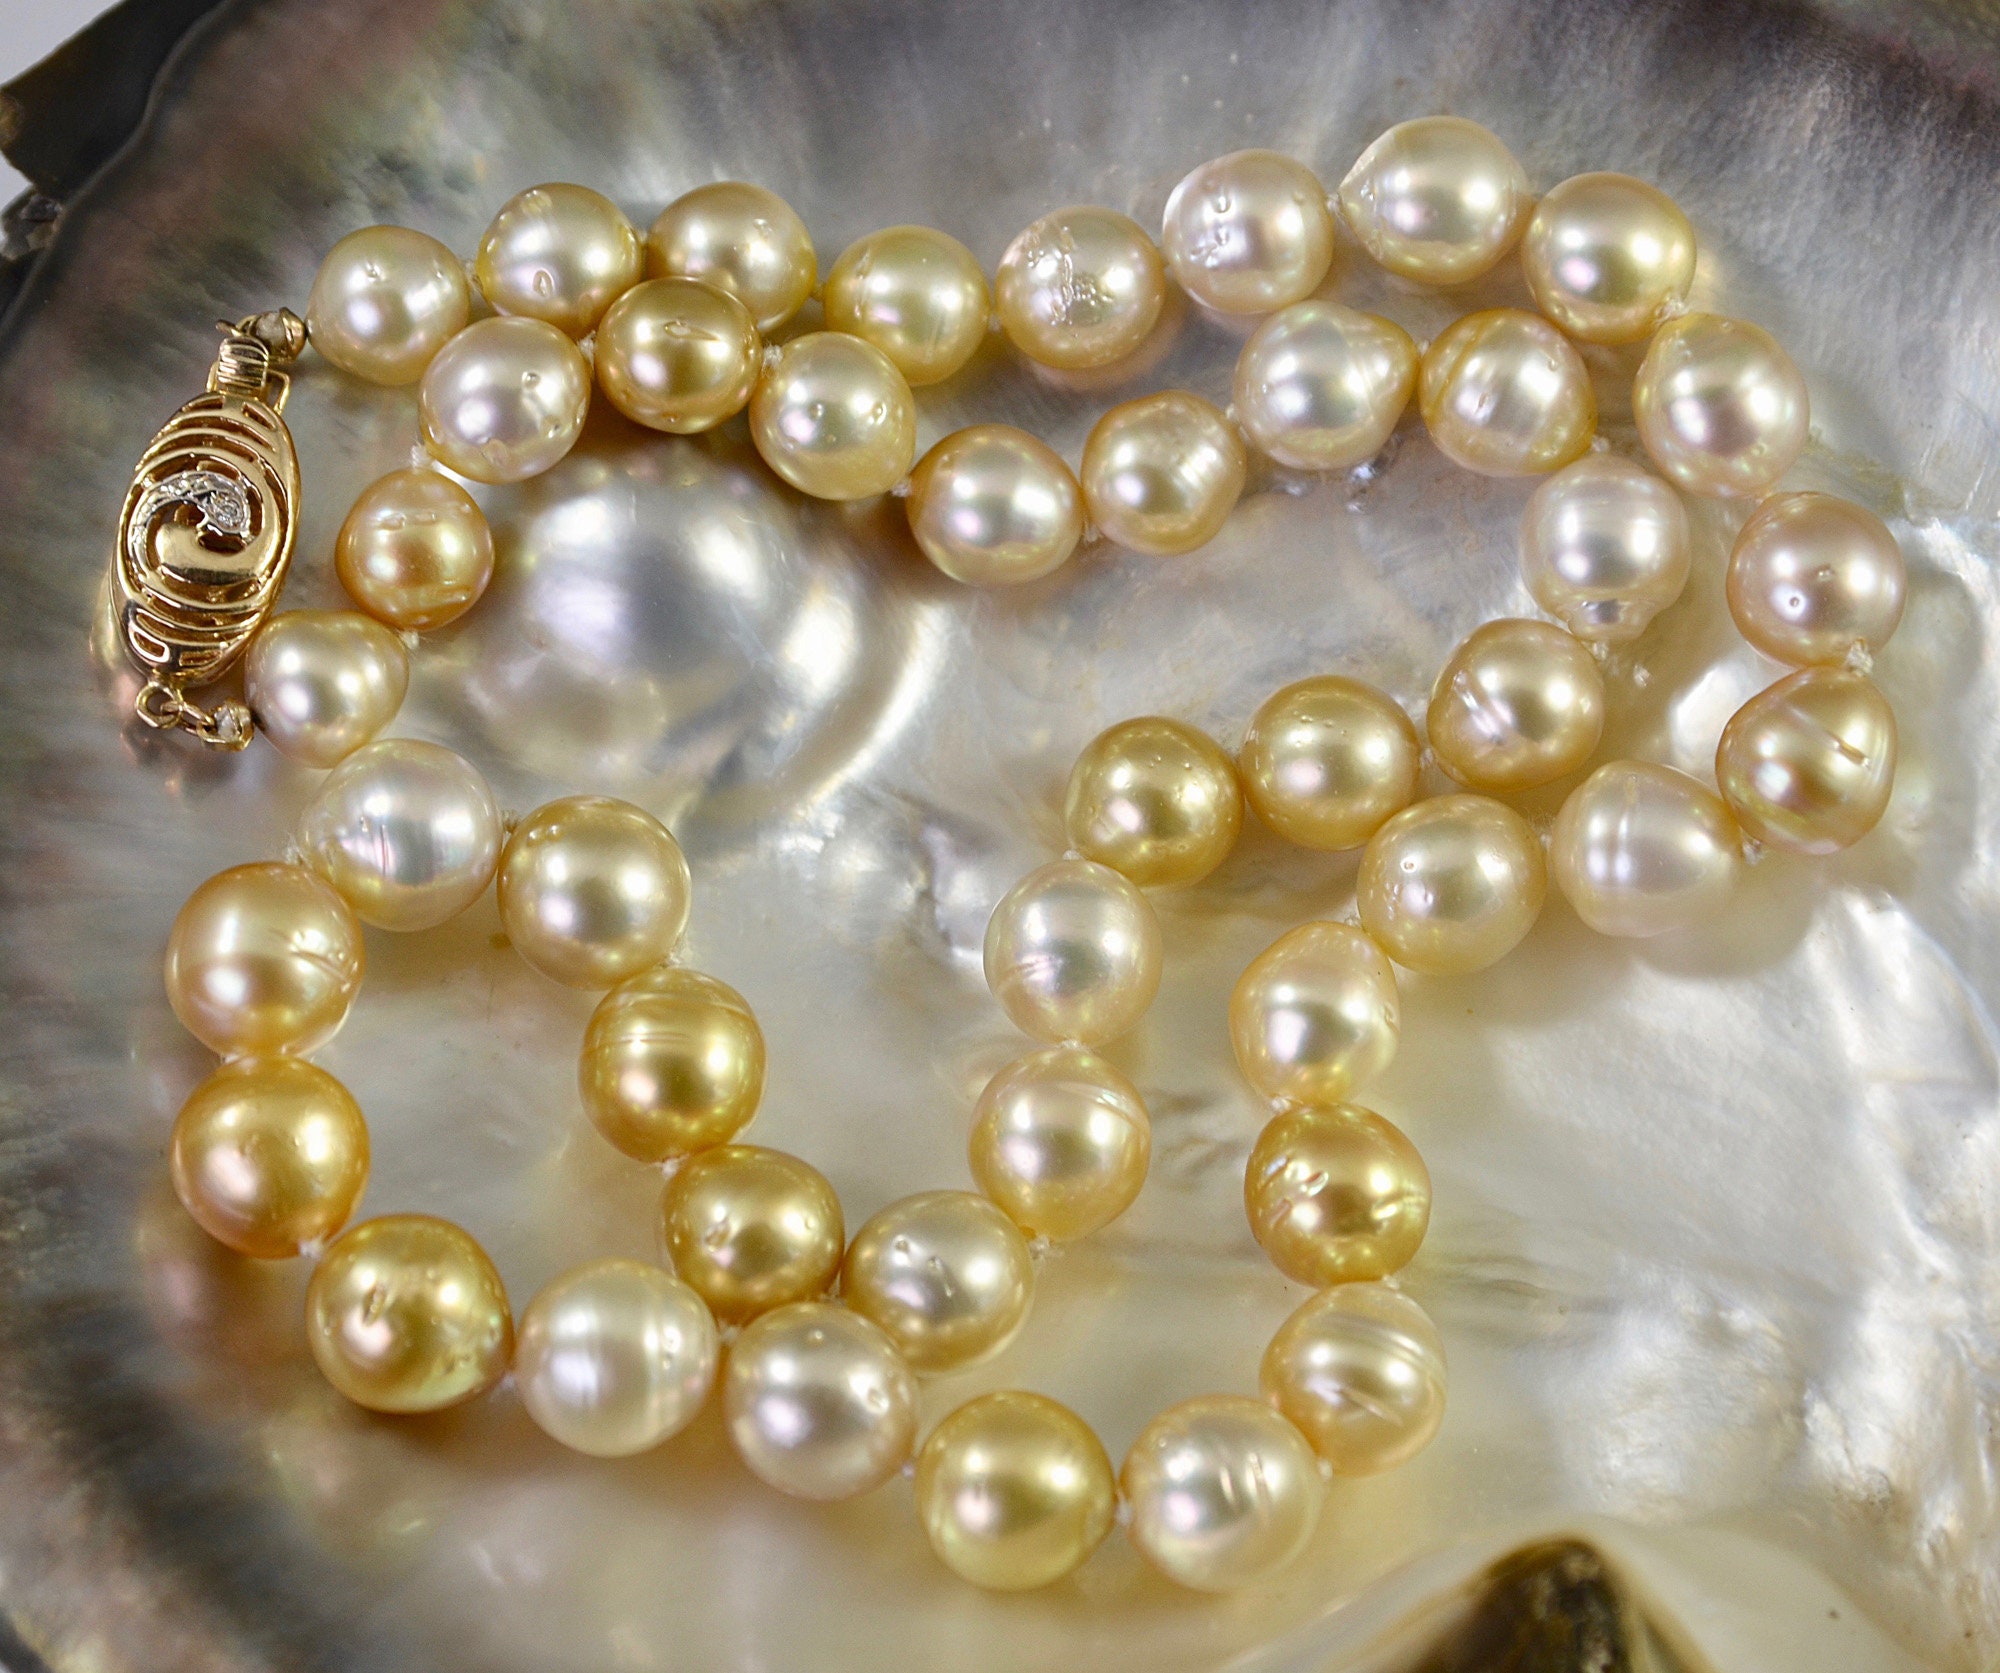 Golden South Sea Pearls – Continental Pearl Loose Pearl, Pearl Necklaces &  Jewelry